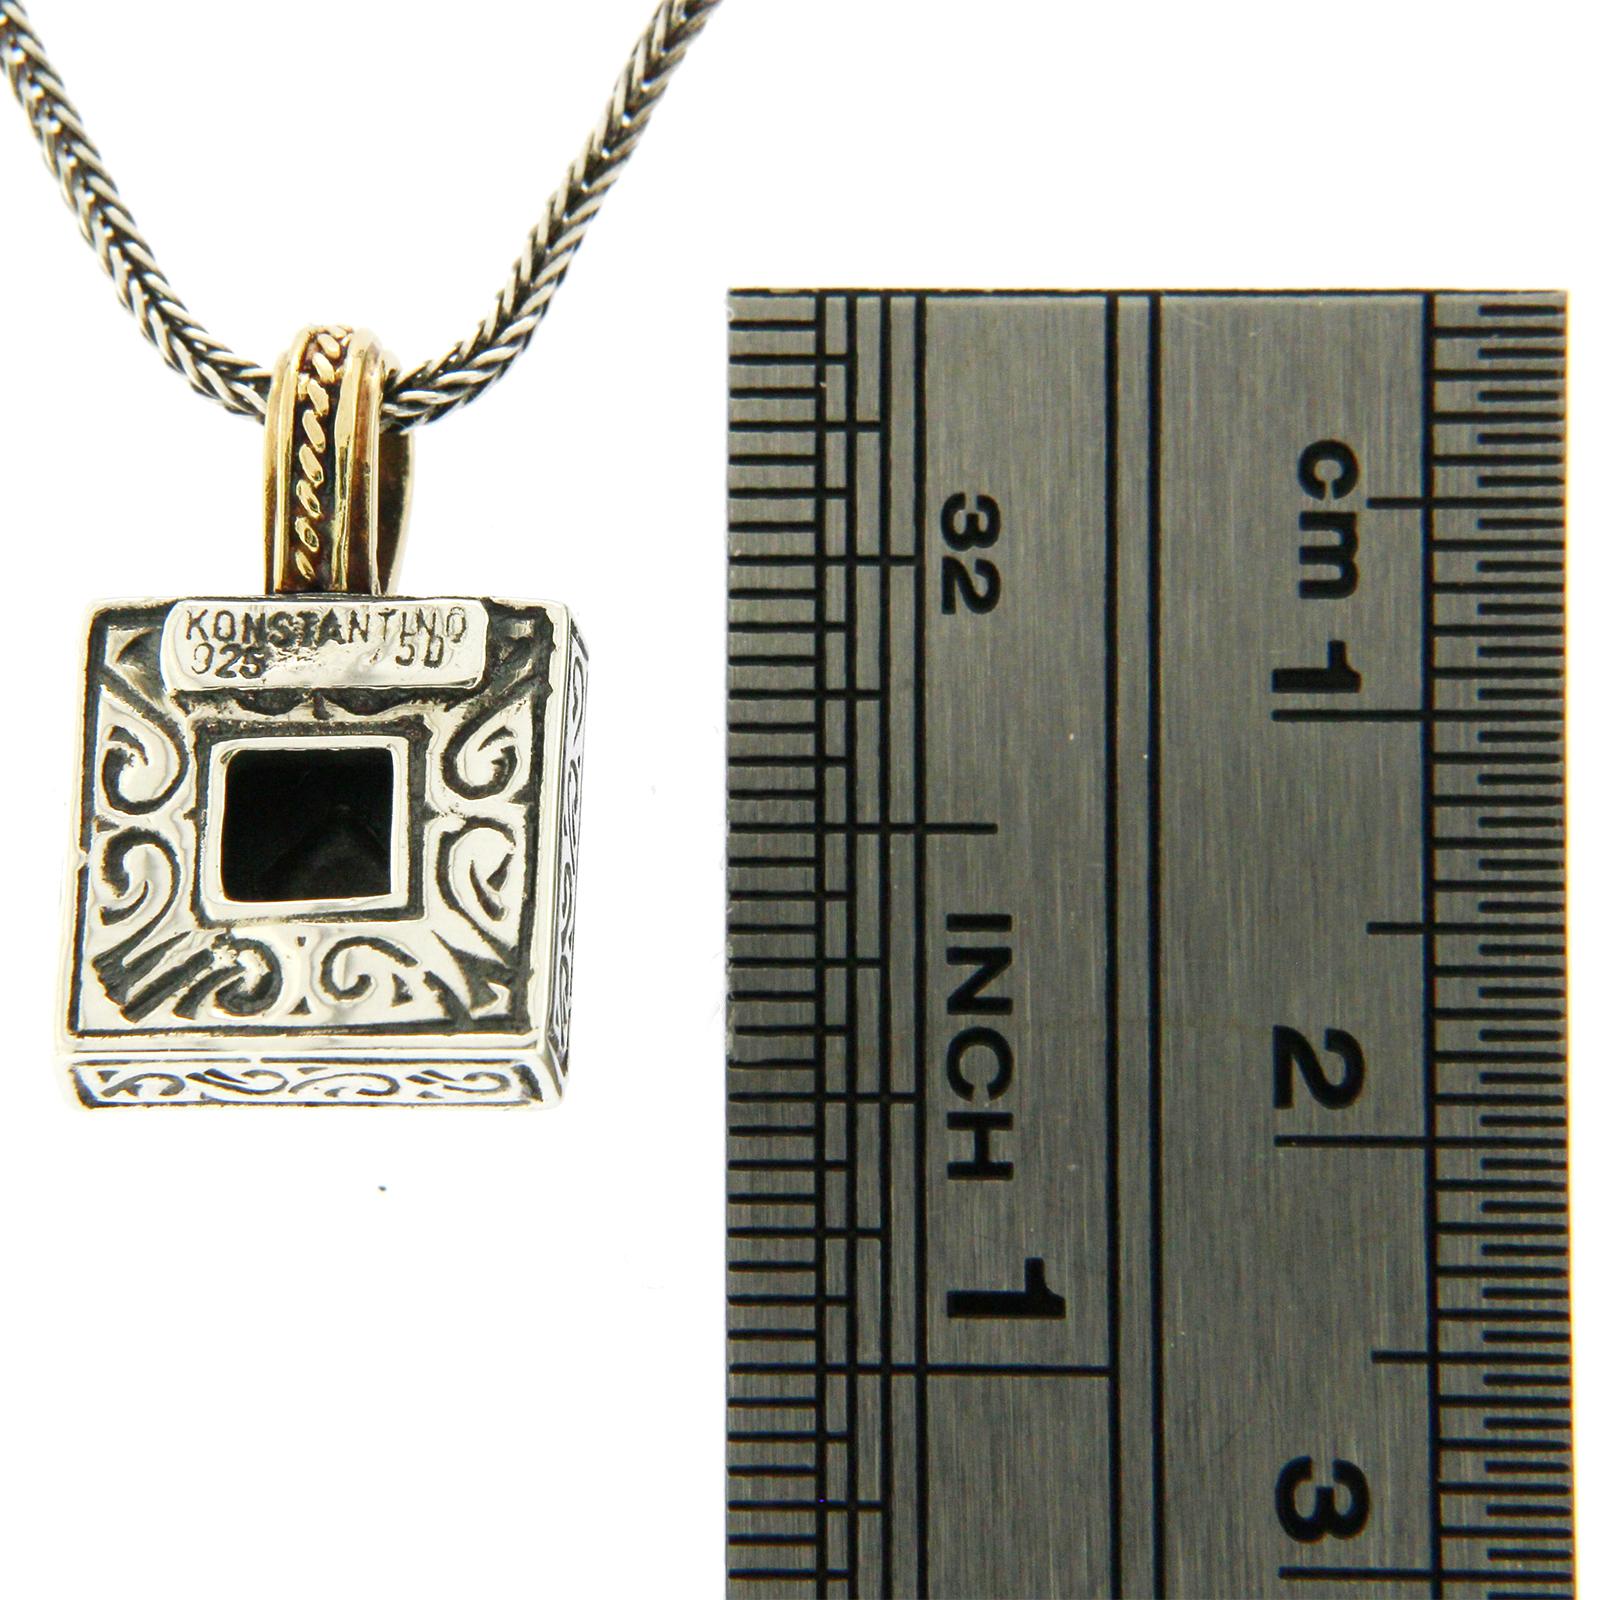 Type: Necklace
Wearable Length: 16